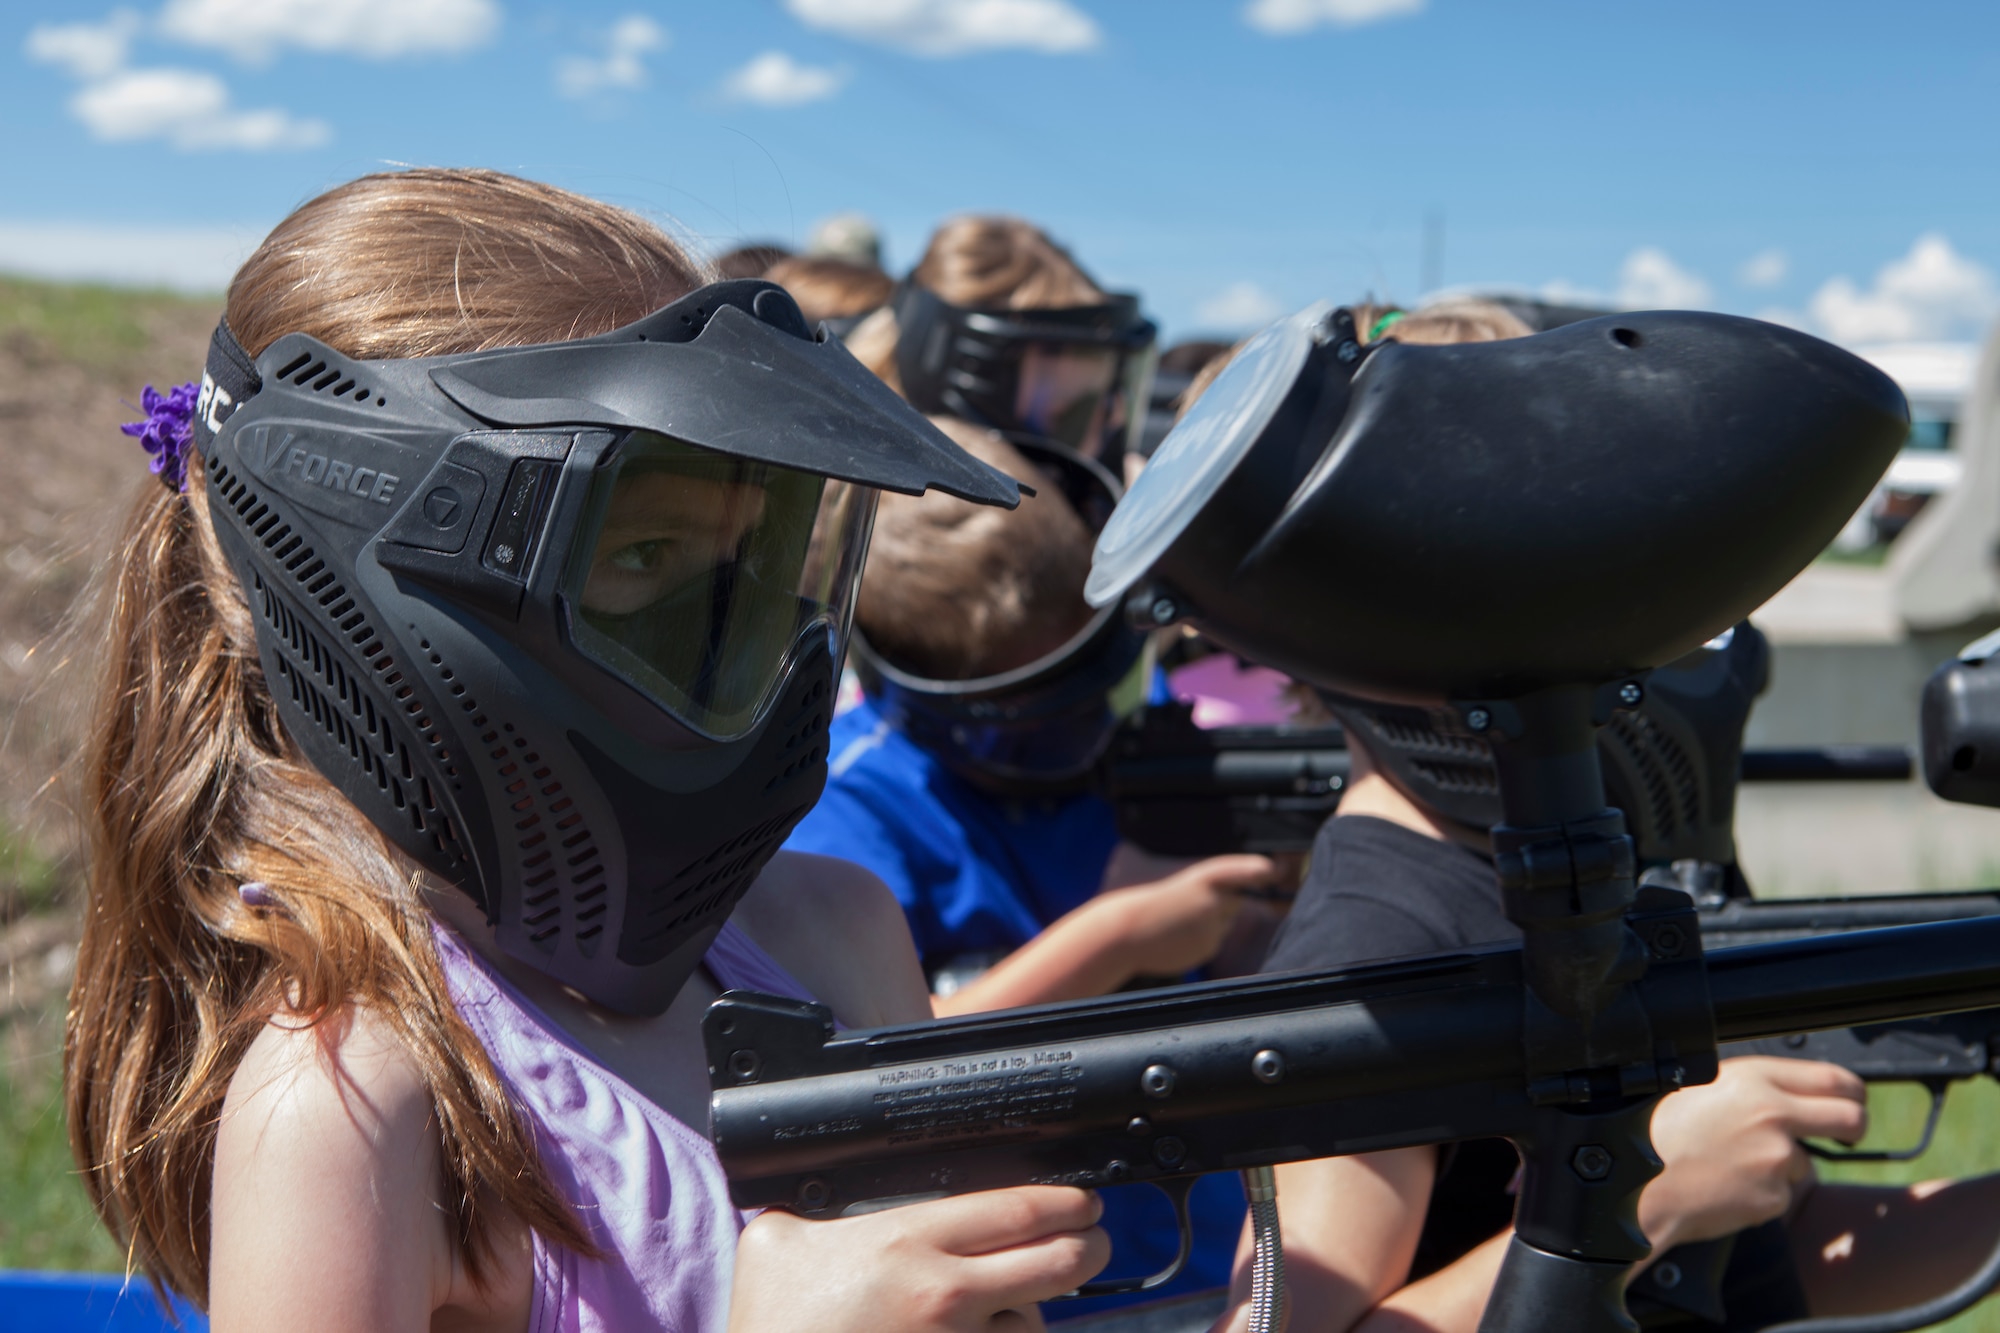 Samara Wright, 8, daughter of Master Sgt. Steven Wright, 20th Air Force enlisted aide, shoots paintballs at the paintball field obstacle course on F.E. Warren Air Force Base, Wyo., June 9, 2015. Shooting the paintballs was one of the activities Outdoor Recreation hosted as part of Basic Recreation Adventure Training Camp for children aged 7-10. (U.S. Air Force photo by Lan Kim)